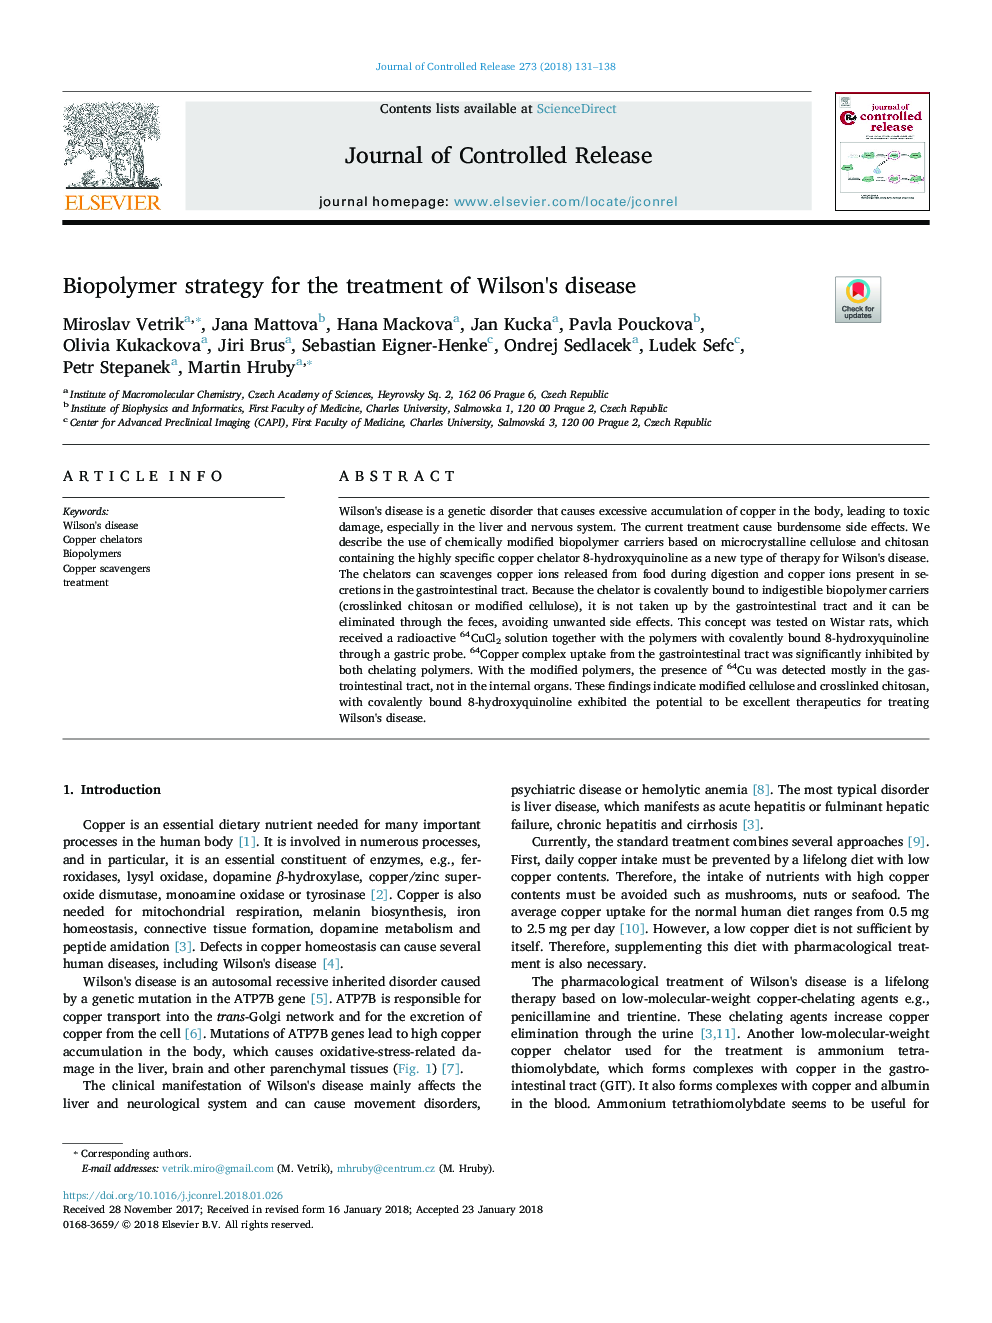 Biopolymer strategy for the treatment of Wilson's disease